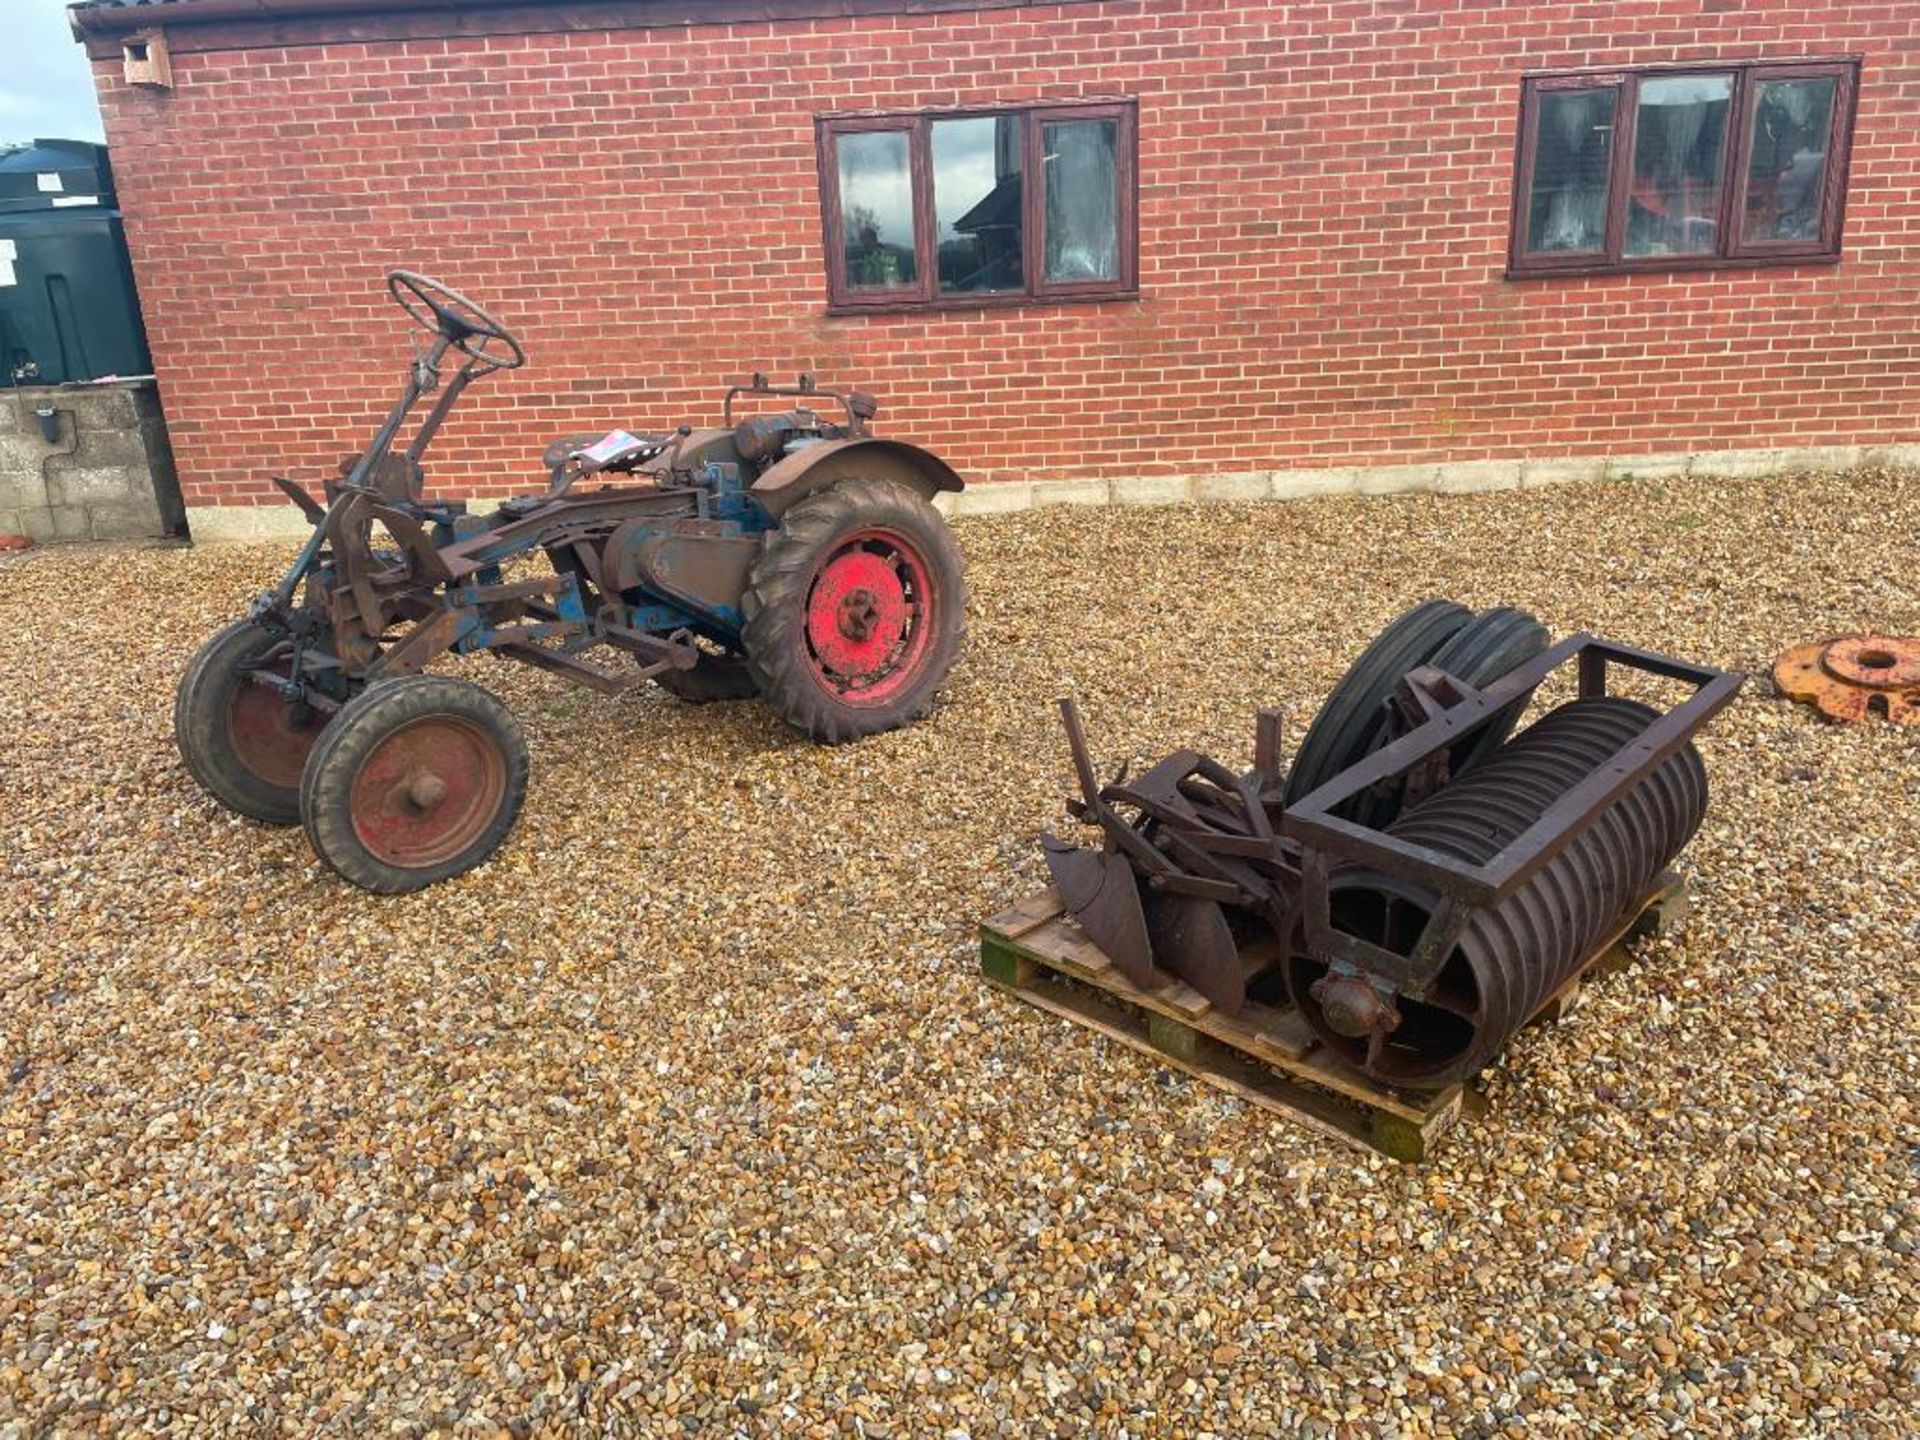 1949 Garner Light Tractor 2wd petrol tractor with JAP Model S air cooled engine on 7.50-16 front and - Image 13 of 19